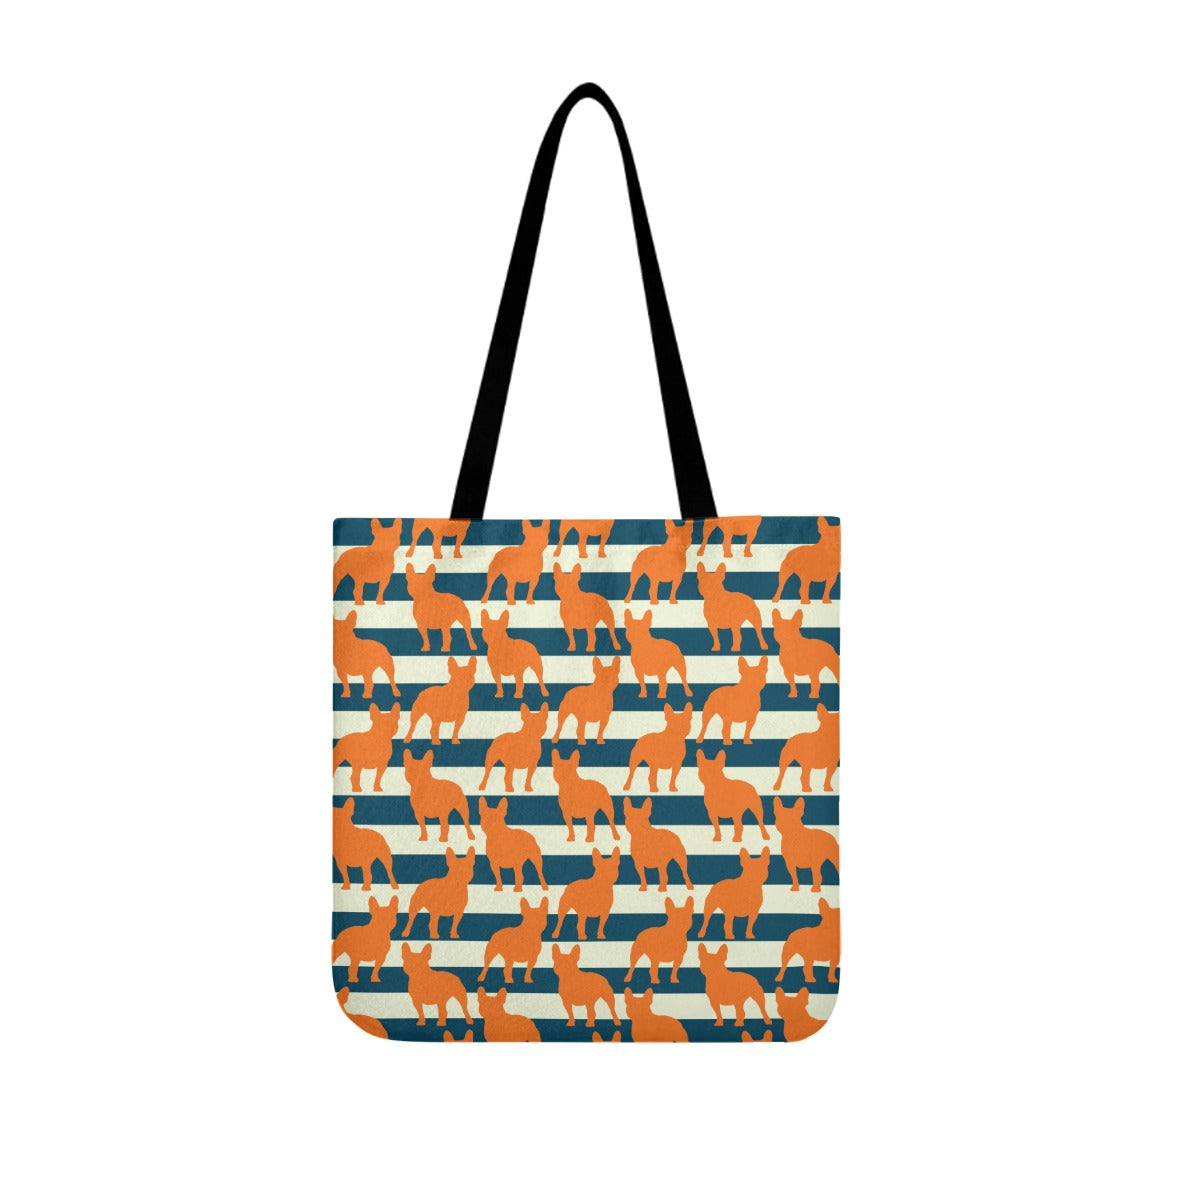 Minnie - Cloth Tote Bags for Boston Terrier lovers